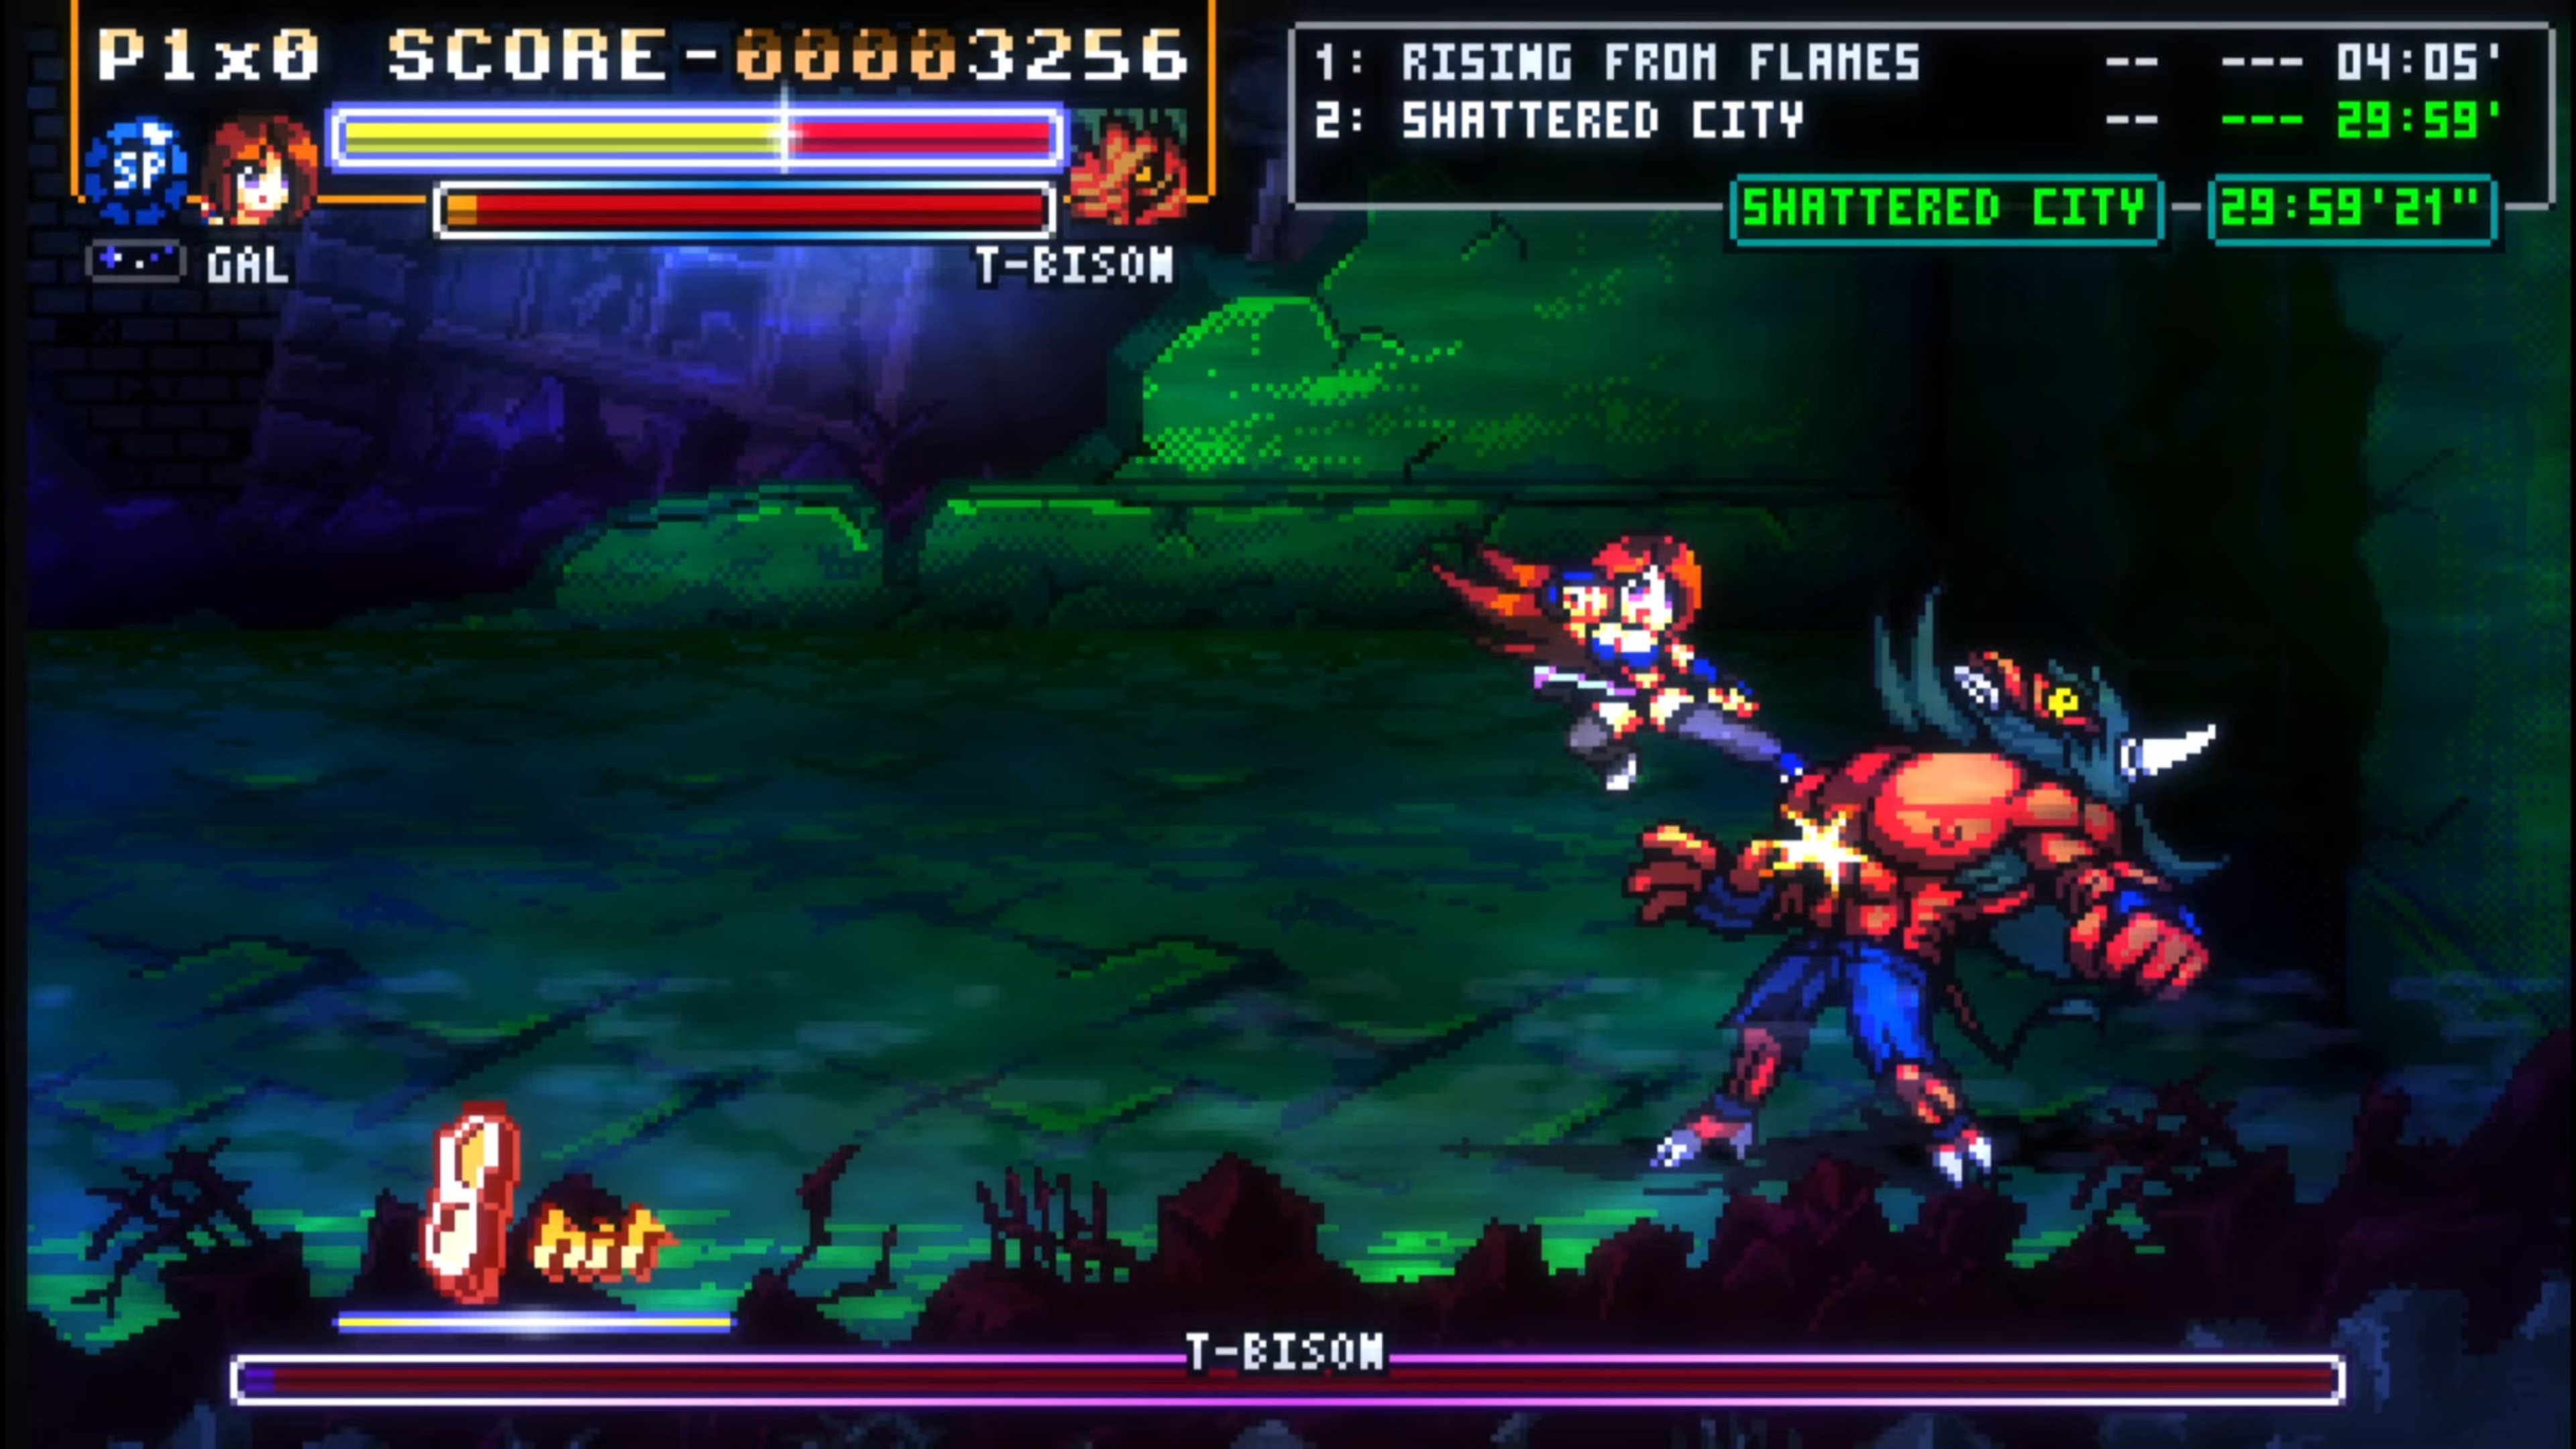 A brown haired 2D pixel art character called Gal performs a flying kick on a huge mutated bison in the arcade style beat'em up Fight'N Rage. She is dressed in a blue outfit with grey knee high stockings. The top left of the image shows the players number of lives, current health, score and a blue special attack (SP) meter. The top right displays the time for completed/current levels, with the current level time shown in green. Along the width of the bottom of the image is the heath meter for the current enemy called T.Bison. above this bar to the left is the combo hit counter reading 8 hits